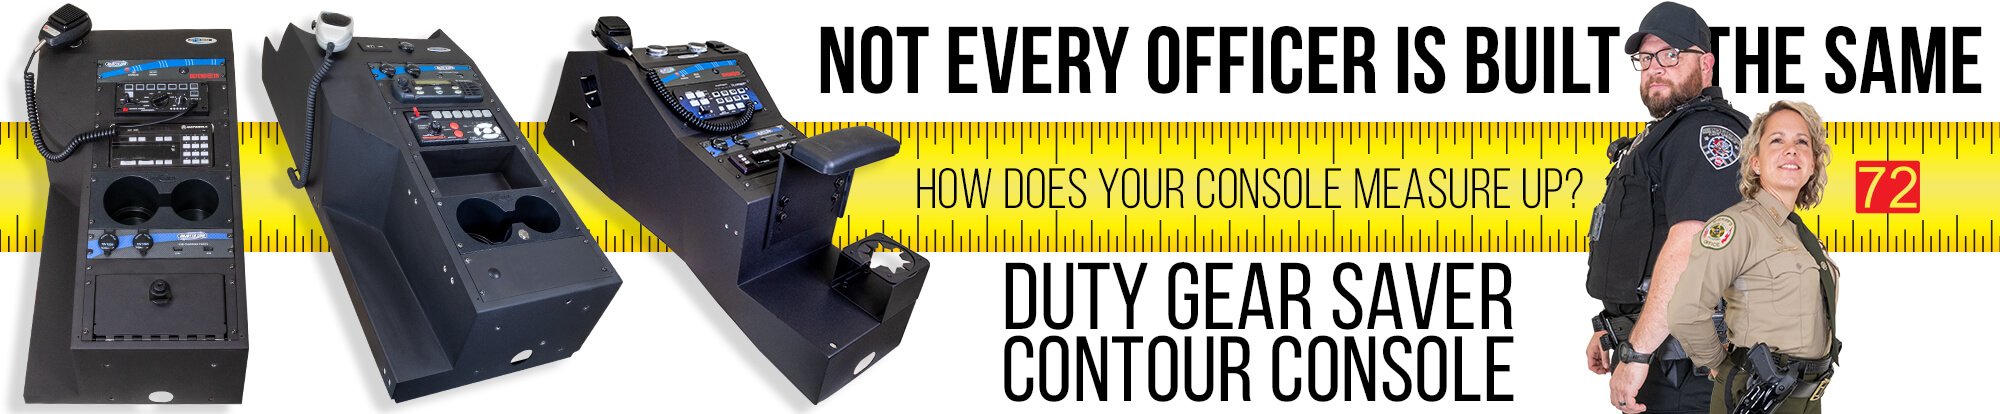 Introducing The Duty Gear Saver Consoles